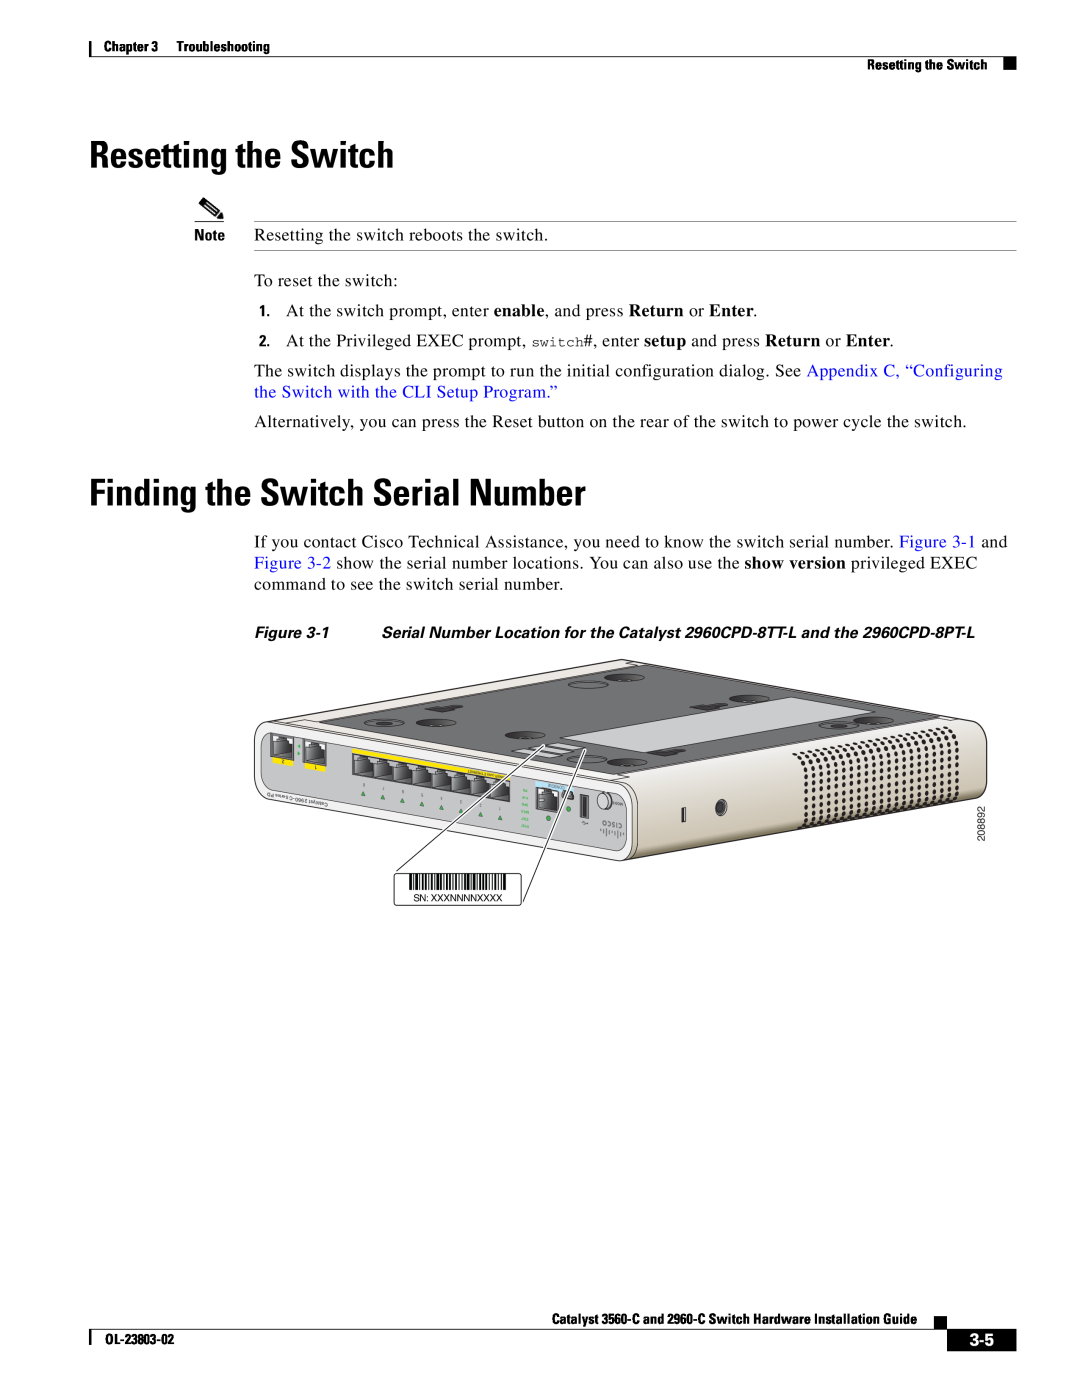 Cisco Systems 3560-C manual Resetting the Switch, Finding the Switch Serial Number 